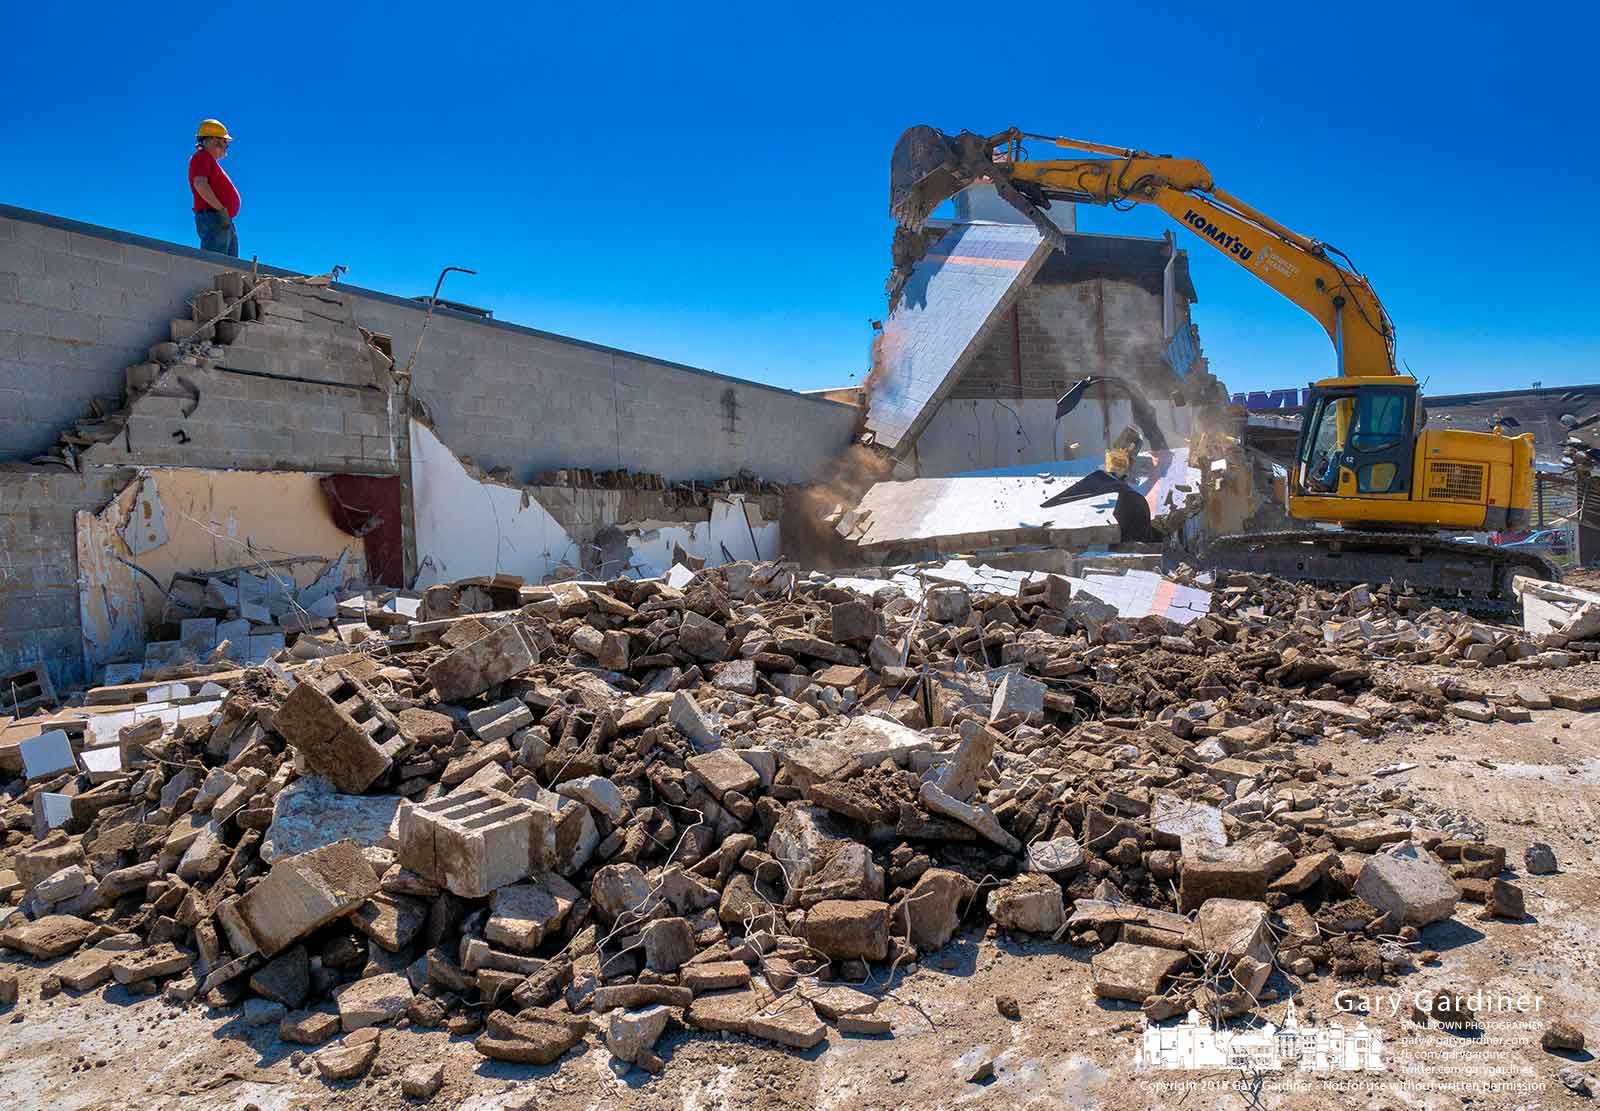 A demolition crew pulls down a section of the last remaining wall of the Hollywood Studio Theater in Glengary Shopping Center to make way for a new Aldi grocery store. My Final Photo for April 30, 2018.